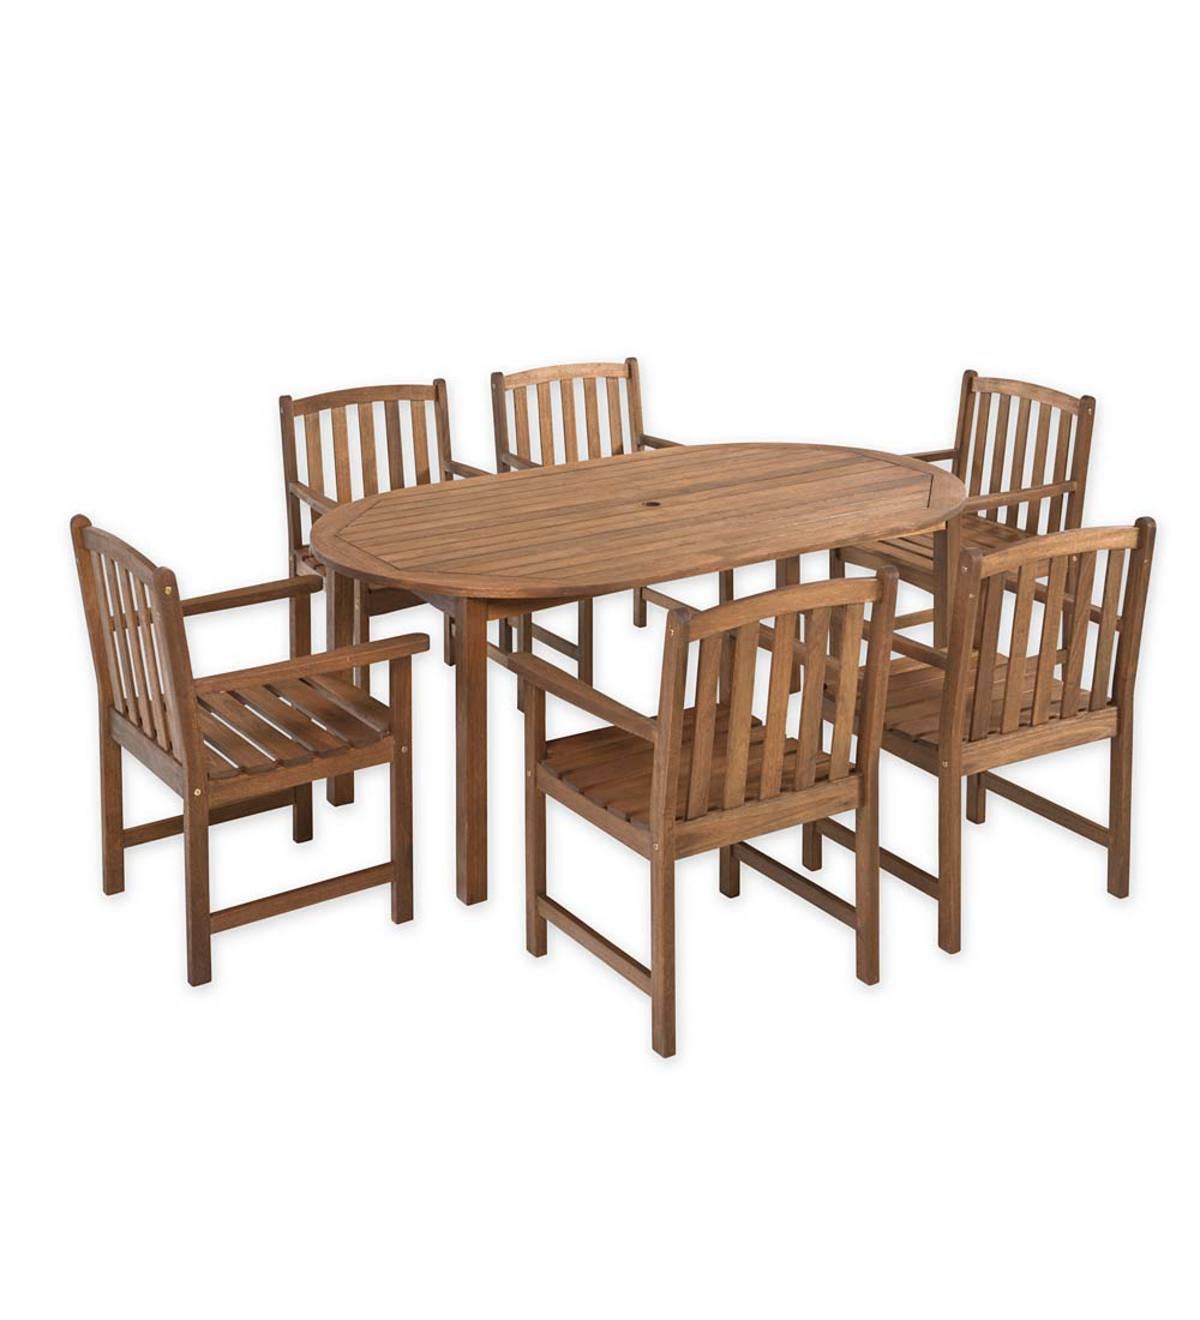 Lancaster Oval Table Set, Oval Table and 6 Chairs